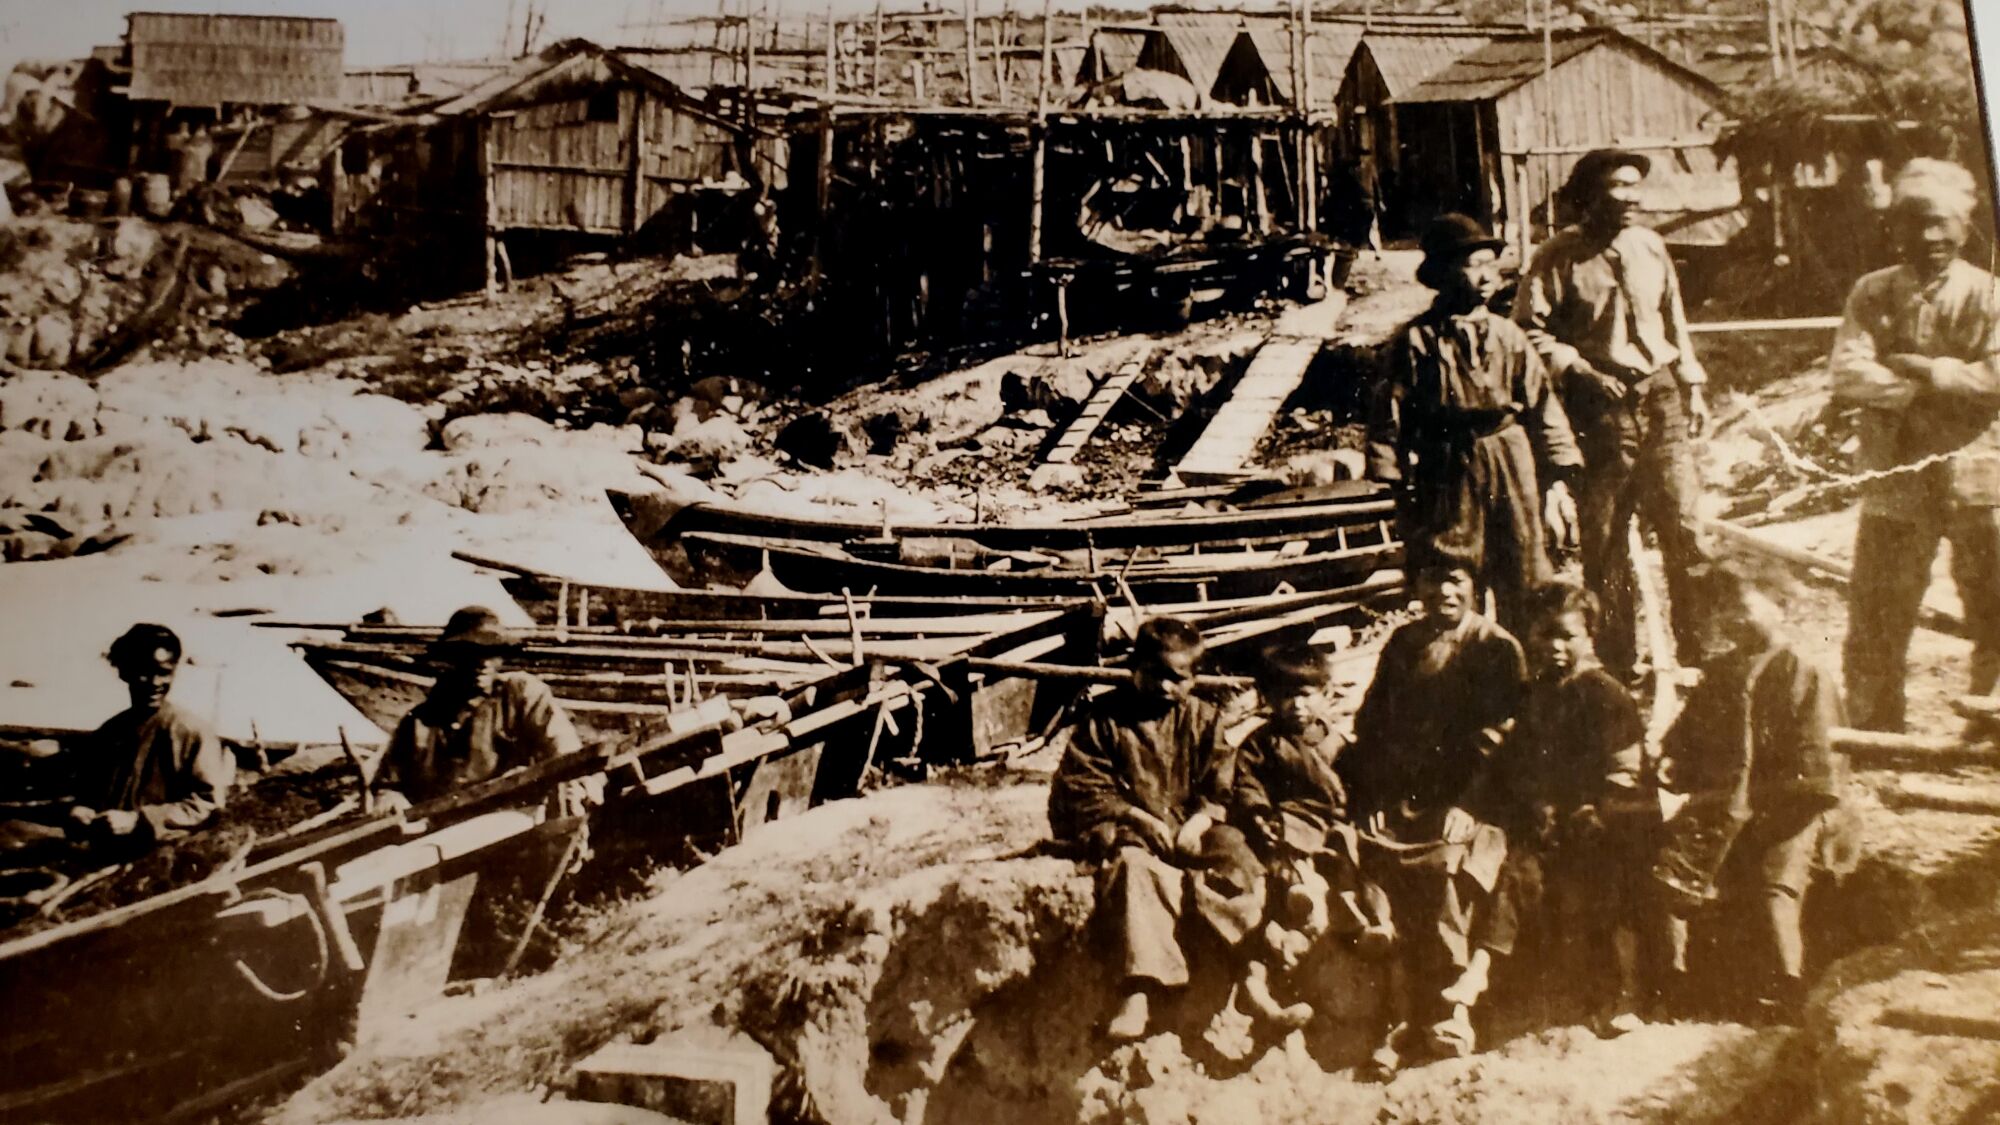 A historic black-and-white photo of fisherman and children of Chinese descent near a cluster of wooden boats and houses